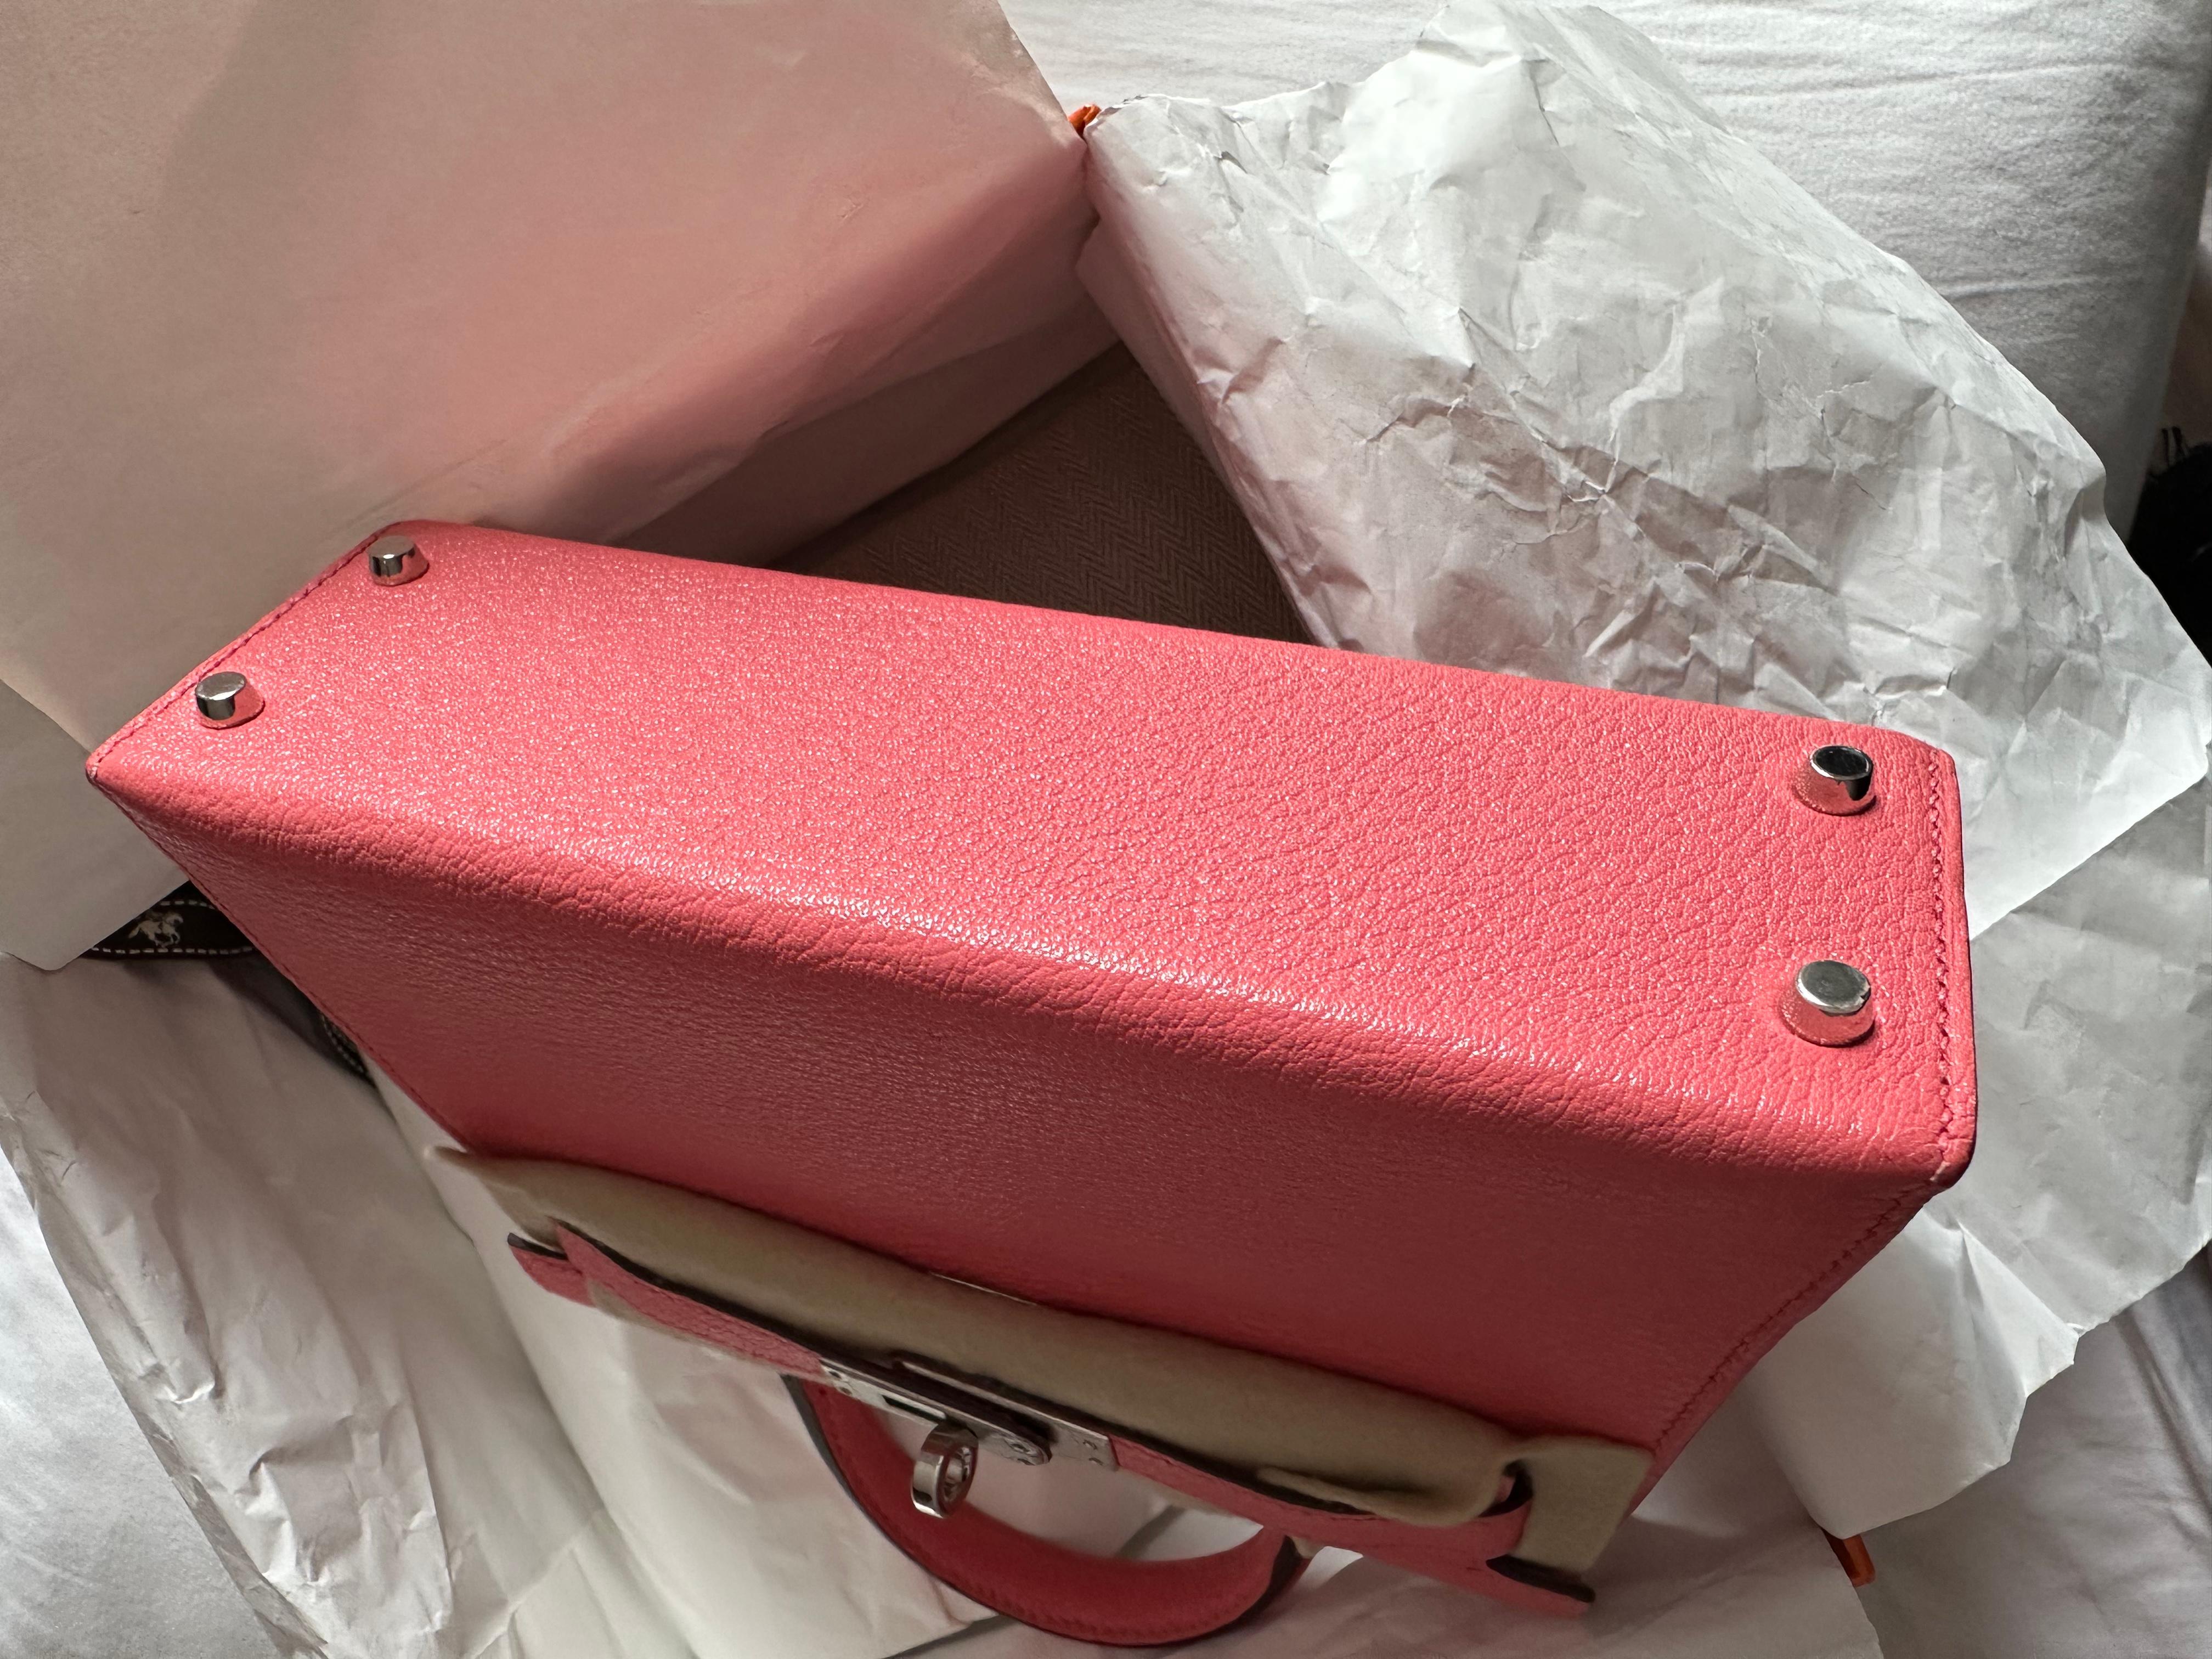 Hermes Mini Kelly 20 Rose d’ete Chevre bag In Excellent Condition In London, England